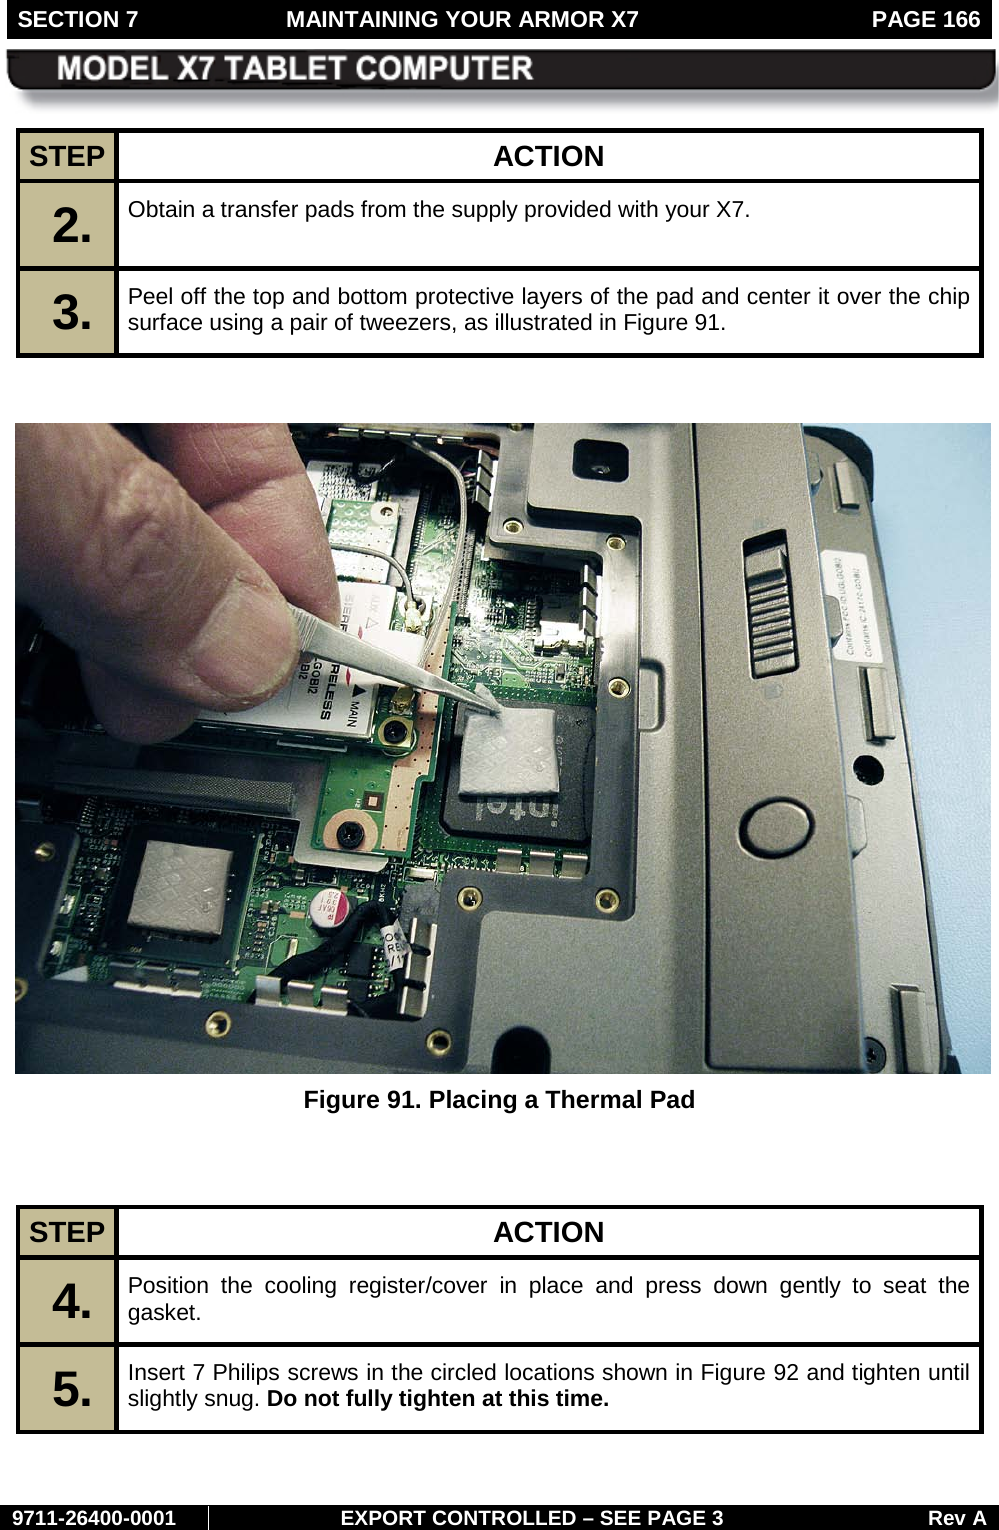 SECTION 7  MAINTAINING YOUR ARMOR X7  PAGE 166        9711-26400-0001 EXPORT CONTROLLED – SEE PAGE 3 Rev A STEP  ACTION 2.  Obtain a transfer pads from the supply provided with your X7.  3.  Peel off the top and bottom protective layers of the pad and center it over the chip surface using a pair of tweezers, as illustrated in Figure 91.    Figure 91. Placing a Thermal Pad   STEP  ACTION 4.  Position the cooling register/cover in place and press down gently to seat the gasket. 5.  Insert 7 Philips screws in the circled locations shown in Figure 92 and tighten until slightly snug. Do not fully tighten at this time. 